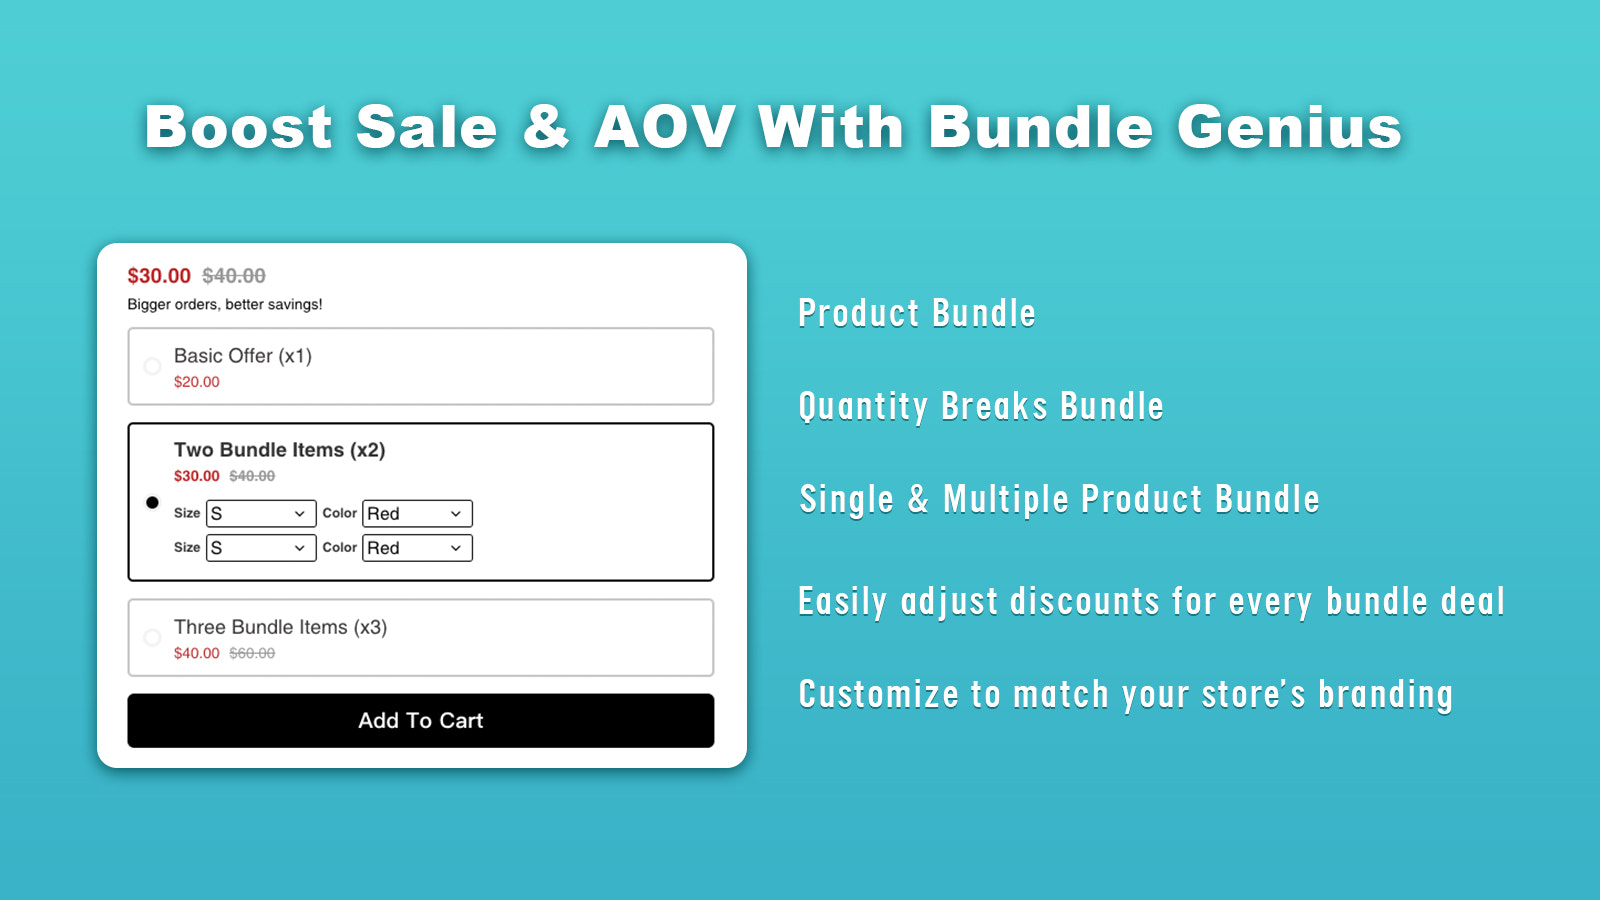 Create bundles, offers, and 'buy one, get one' deals for product